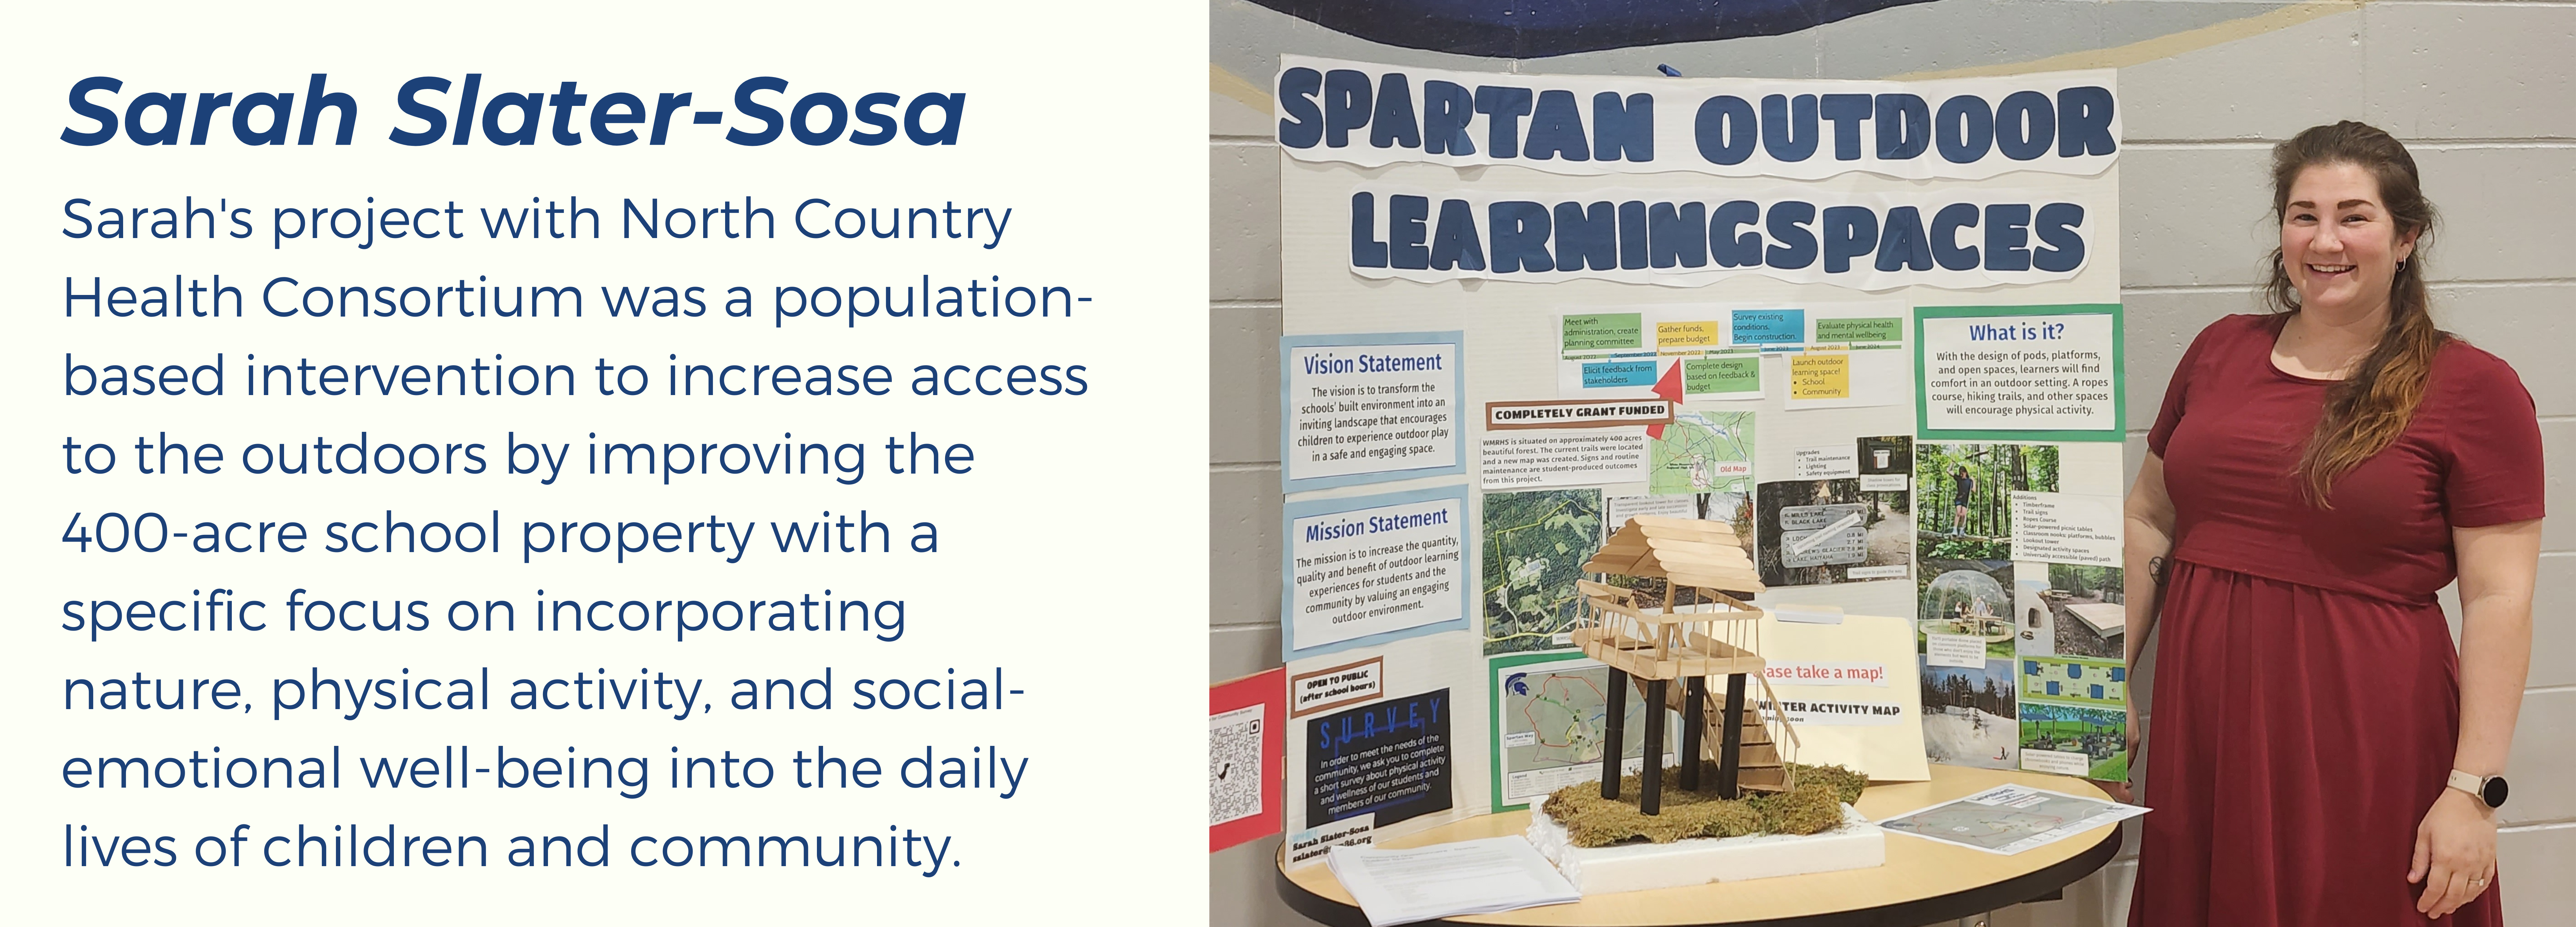 Sara Slater-Sosa- Sarah's project with North Country Health Consortium was a population-based intervention to increase access to the outdoors by improving the 400-acre school property with a specific focus on incorporating nature, physical activity, and social-emotional well-being into the daily lives of children and community. This slide includes a picture of Sarah next to a poster of her research.